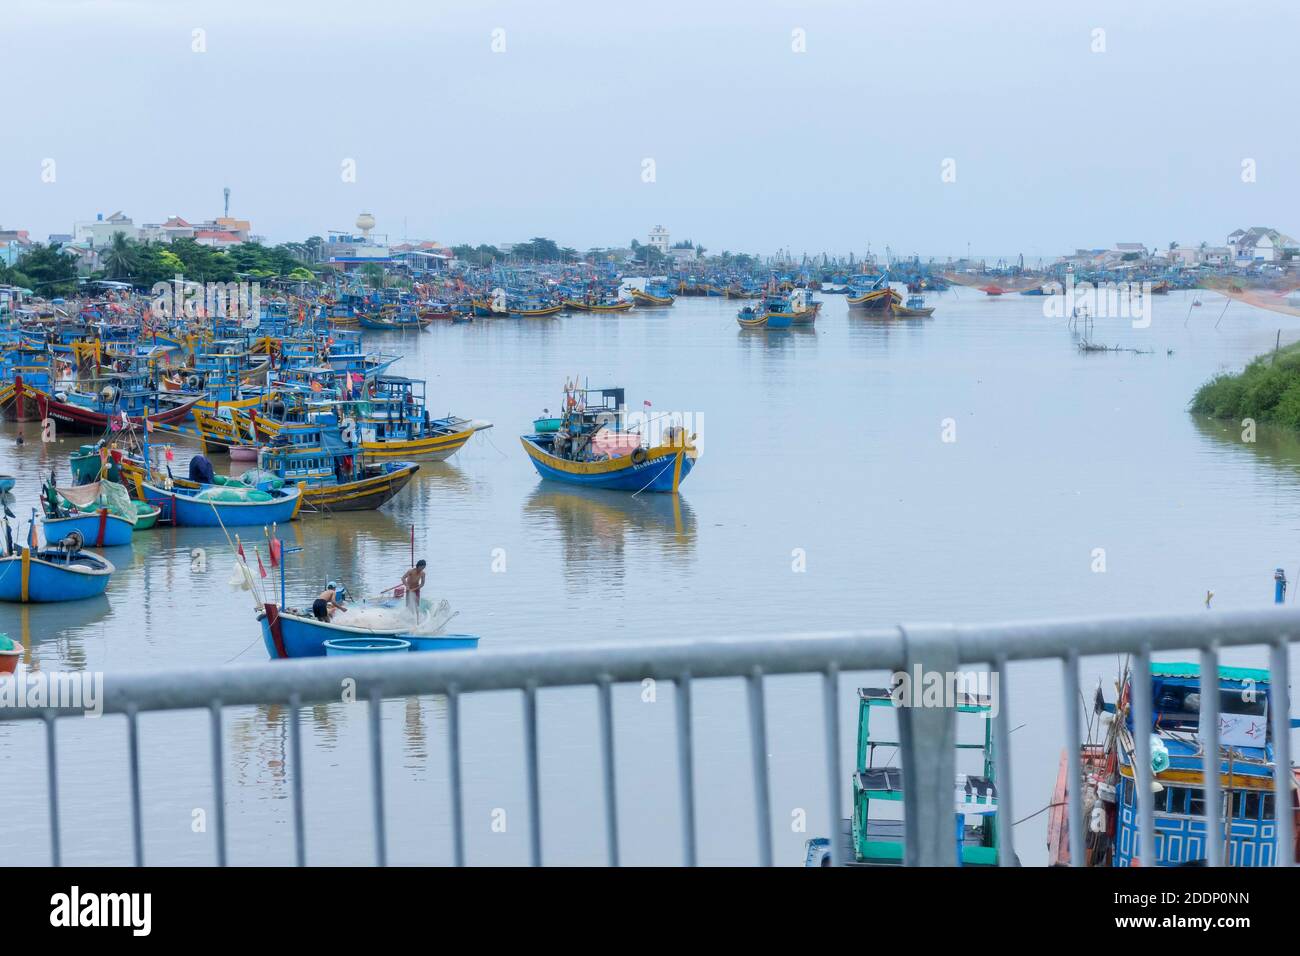 At the bridge looking at the river filled fishing boats. Stock Photo